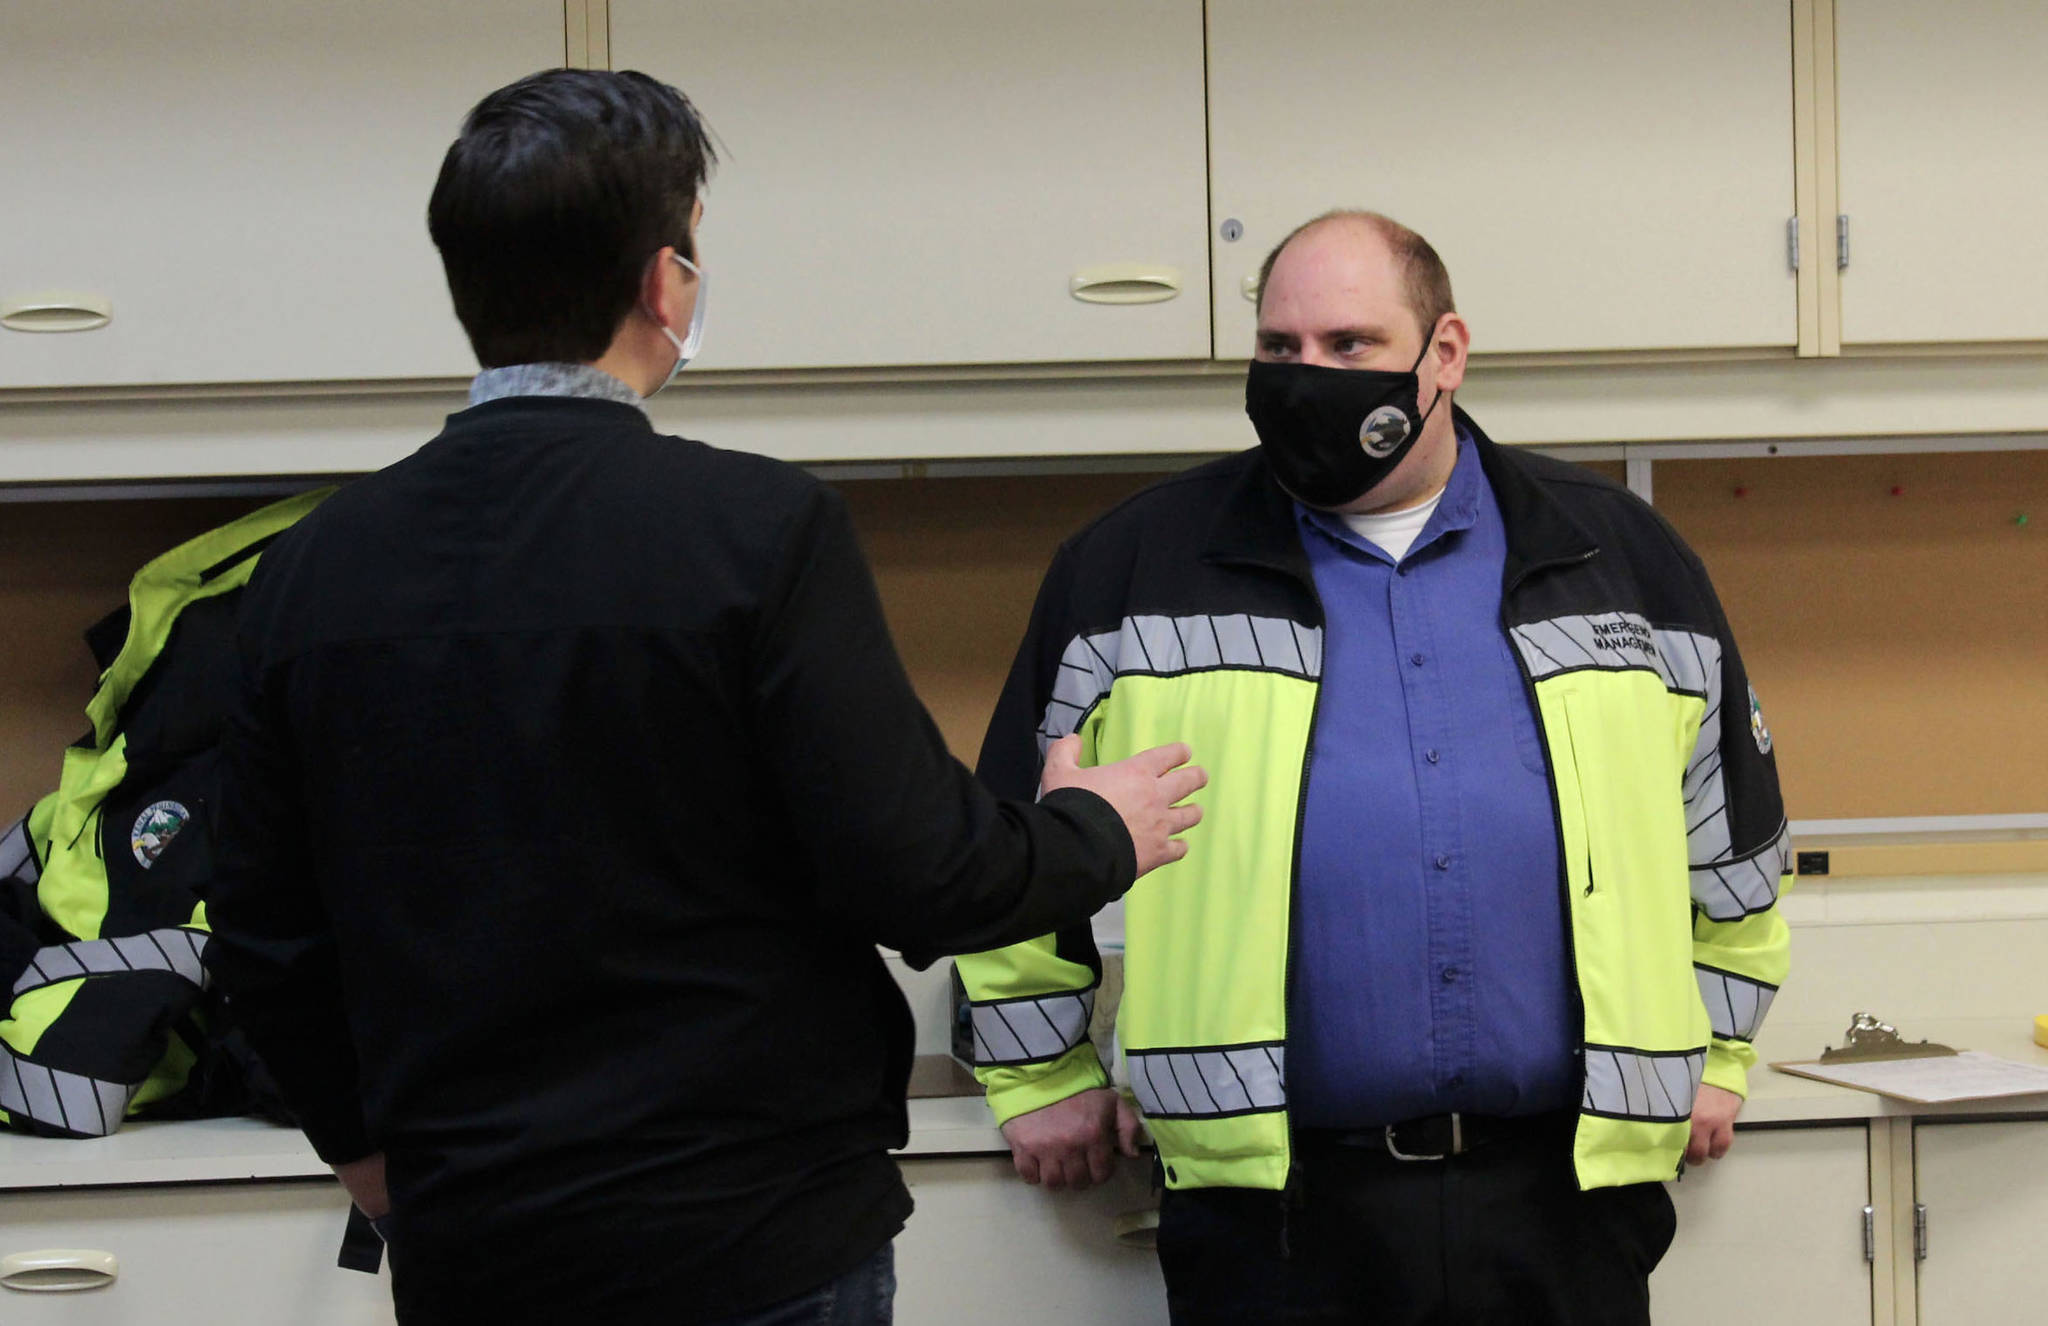 Soldotna Professional Pharmacy owner Justin Ruffridge (left) speaks to Dan Nelson, emergency manager of the Kenai Peninsula Borough Office of Emergency Management, at a COVID-19 vaccine clinic on Friday, Feb. 26, 2021 in Soldotna, Alaska. OEM has partnered with the local pharmacy to host large vaccination clinics on the peninsula. (Photo by Ashlyn O’Hara/Peninsula Clarion)